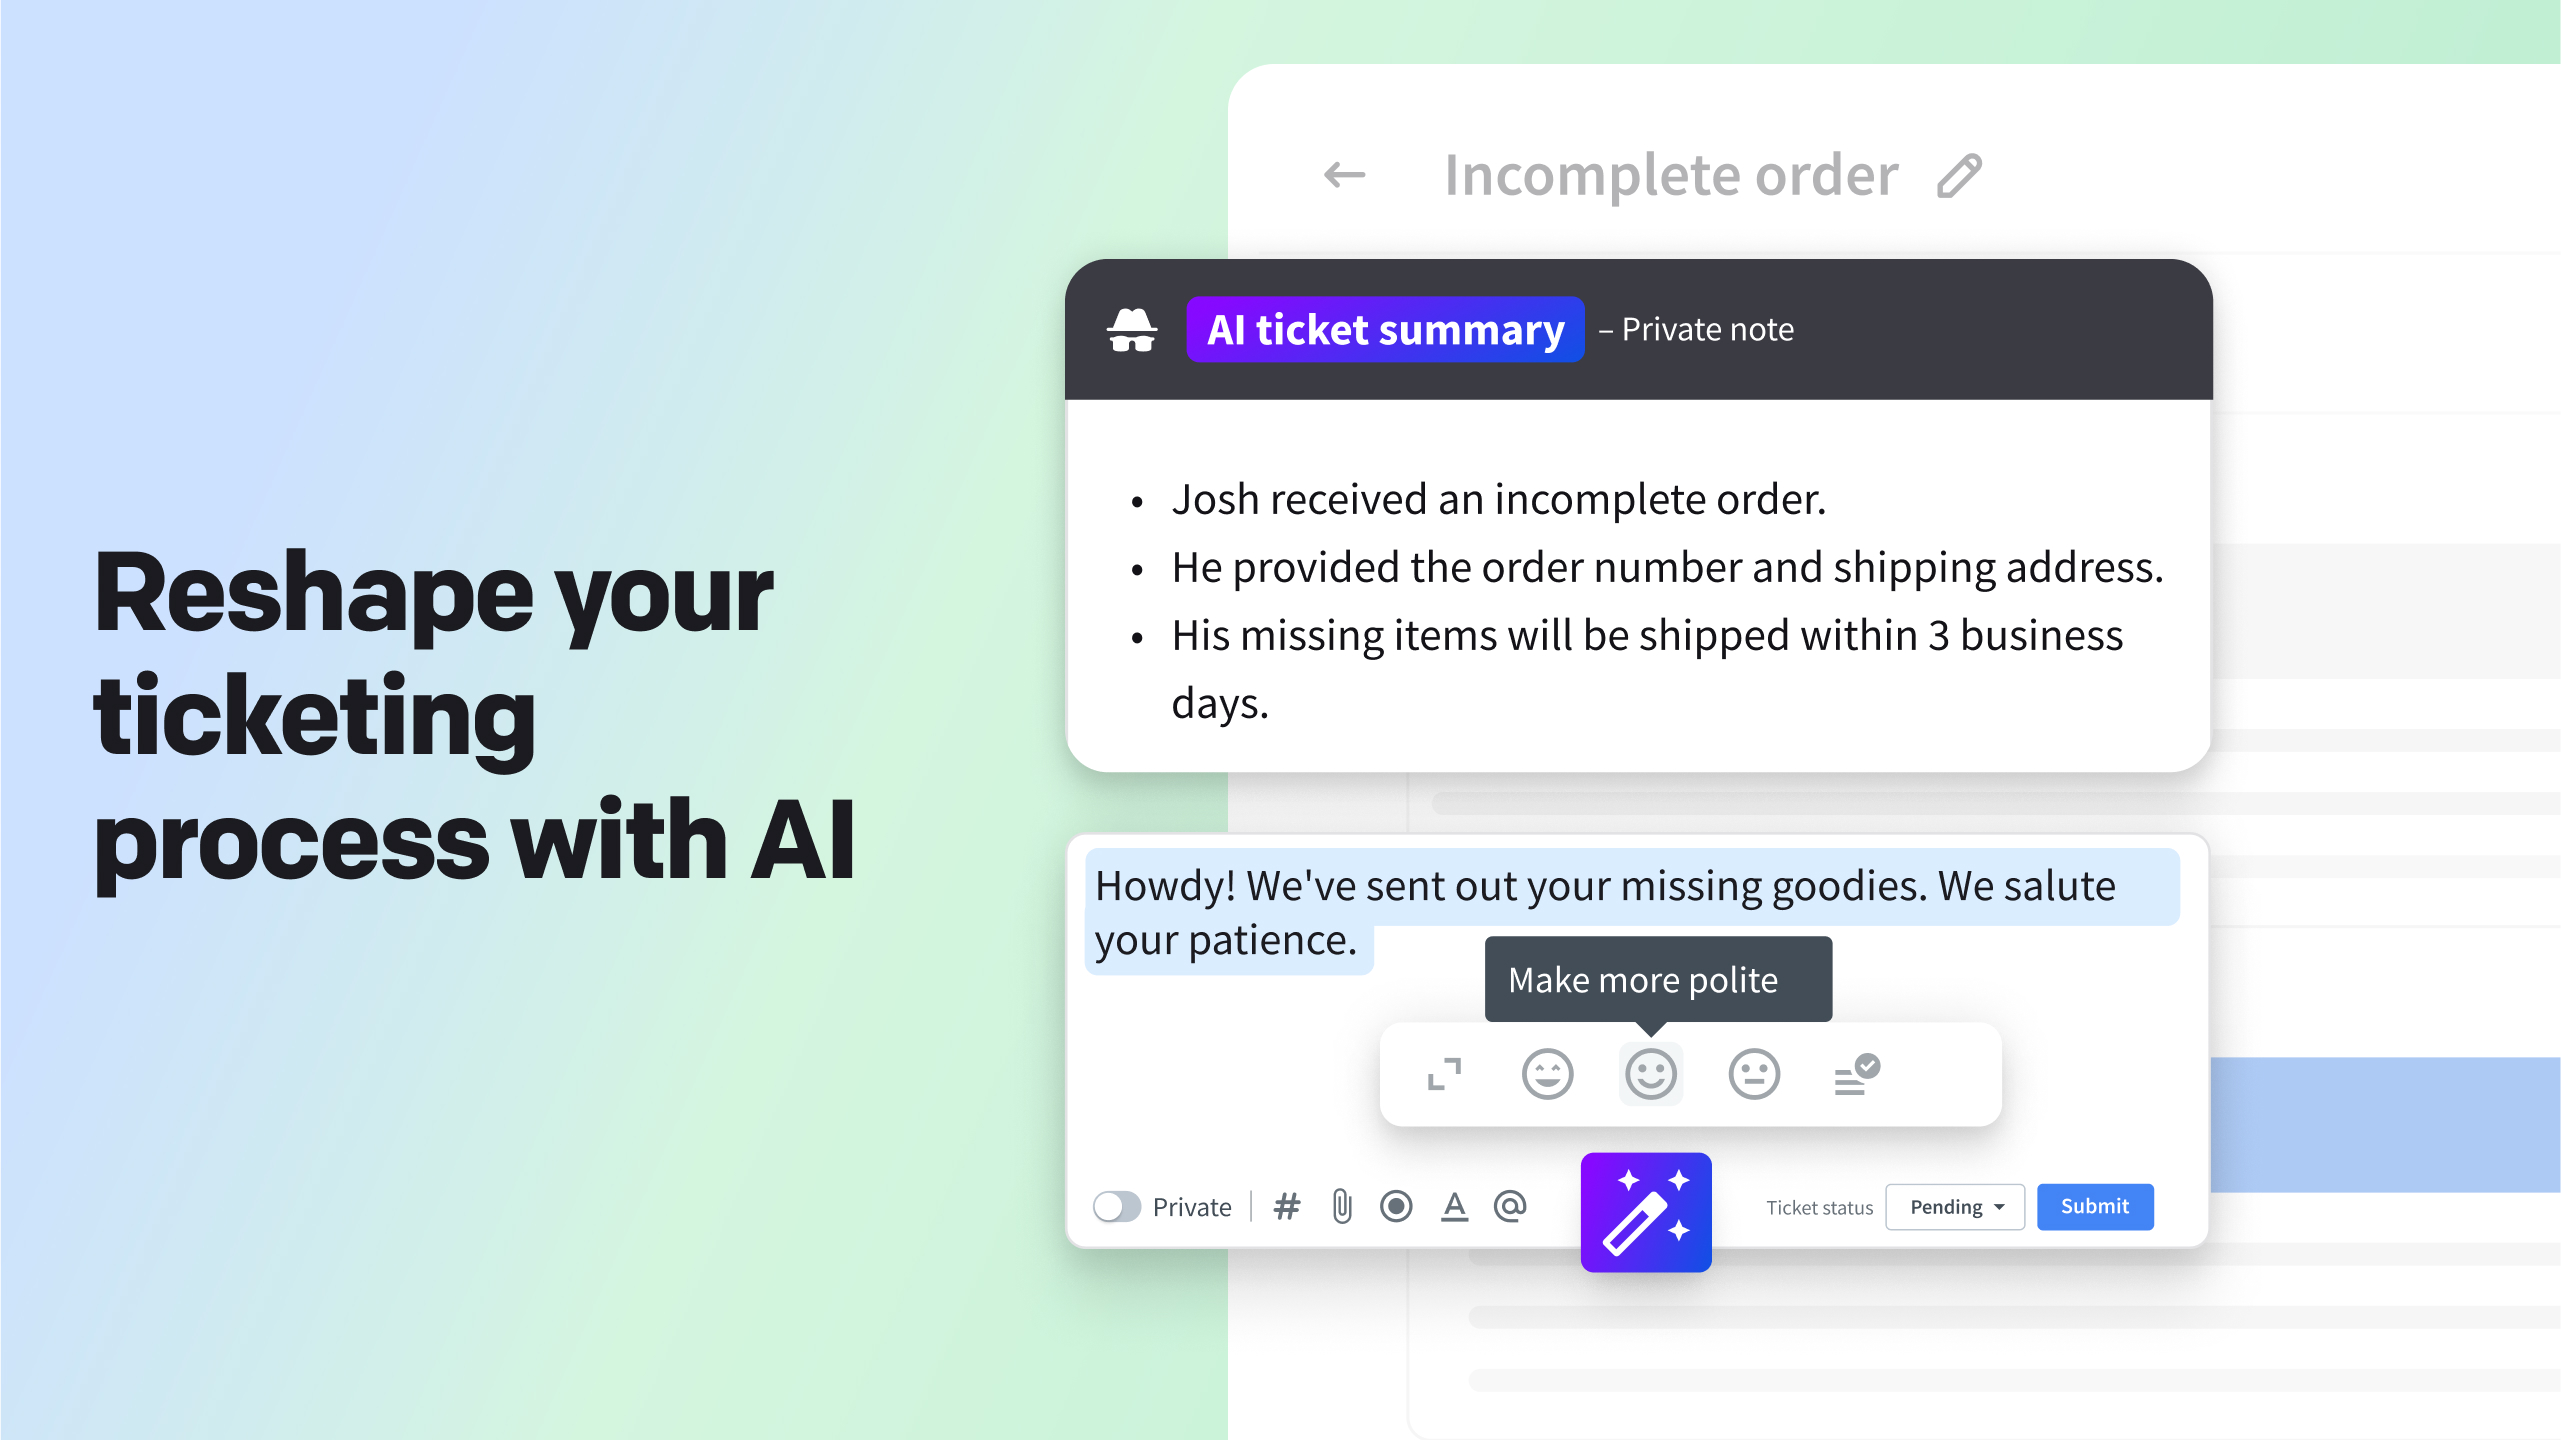 Reshape your ticketing process with AI